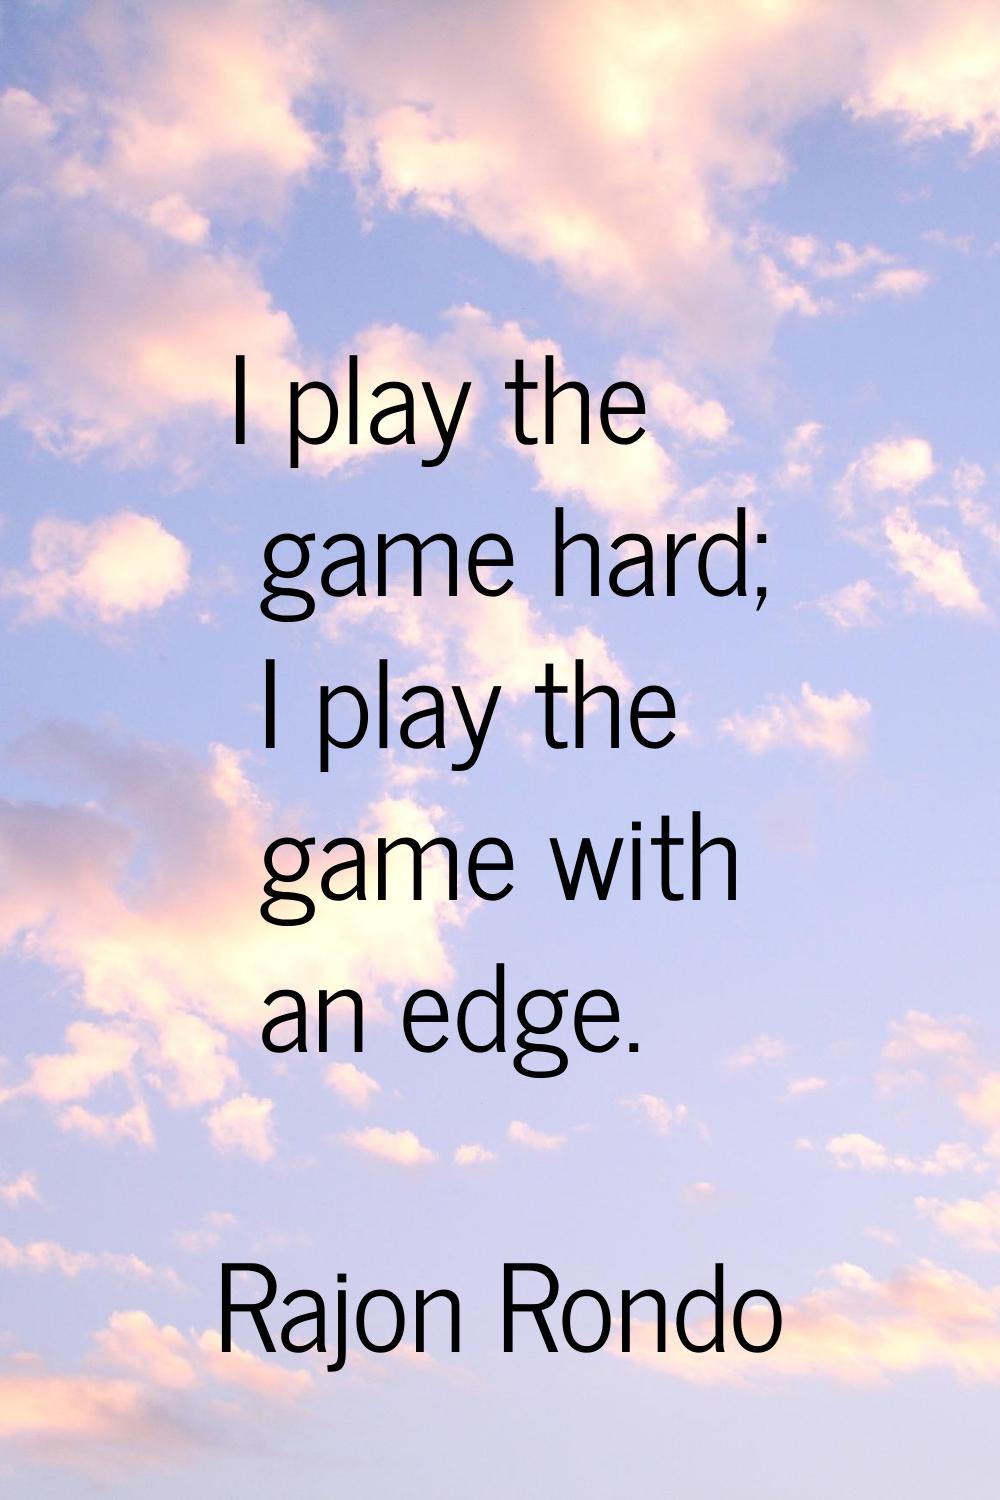 I play the game hard; I play the game with an edge.